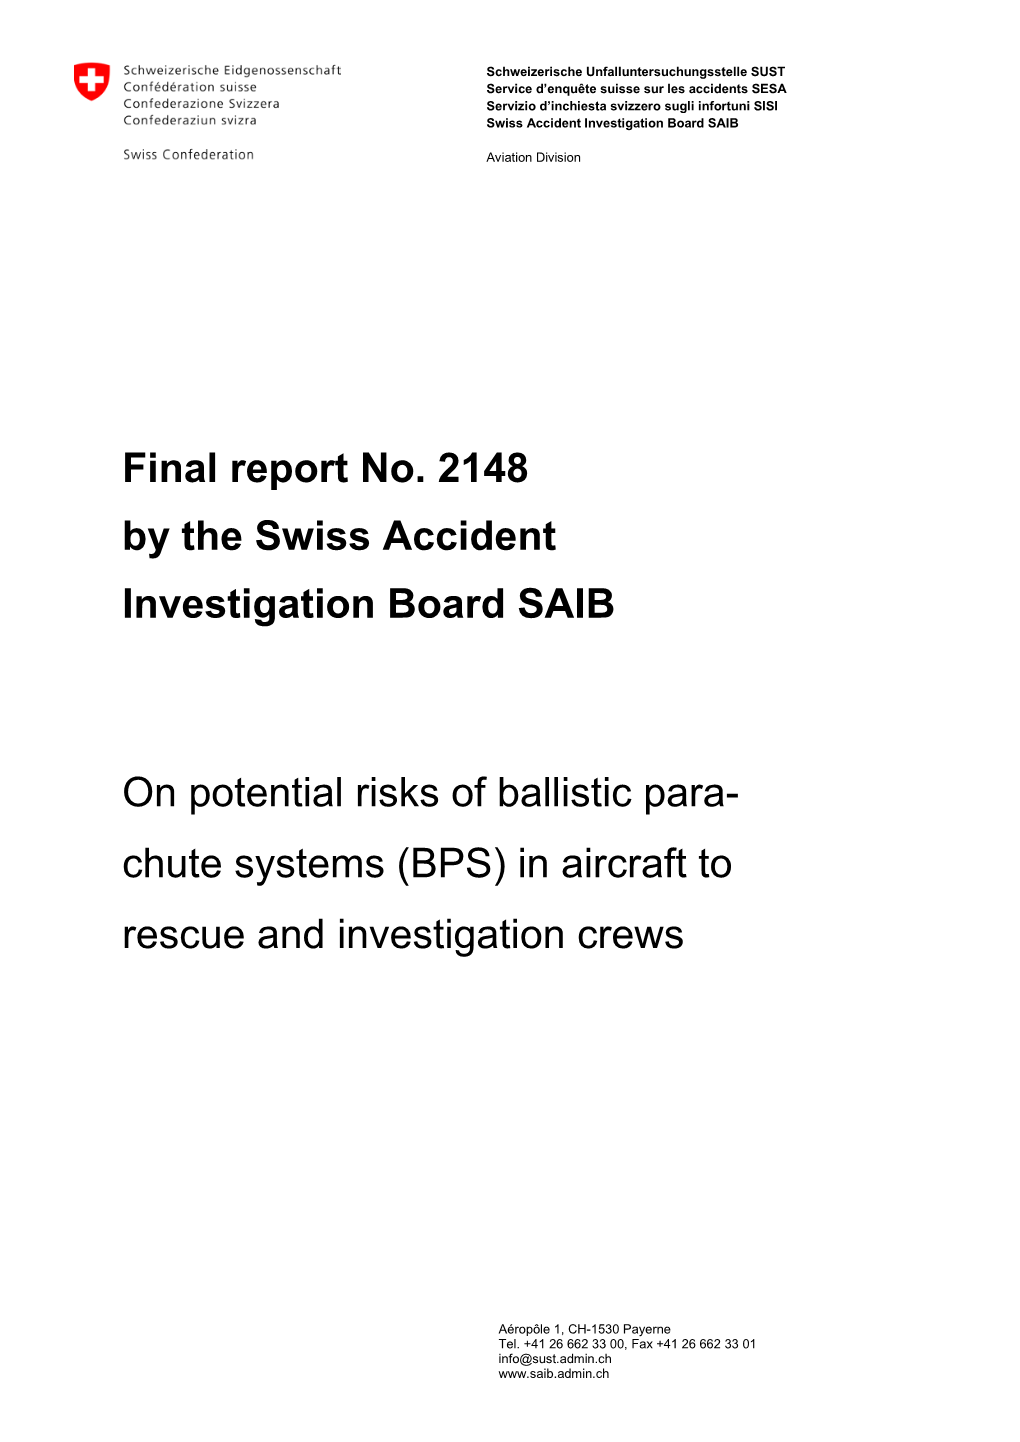 Final Report No. 2148 by the Swiss Accident Investigation Board SAIB